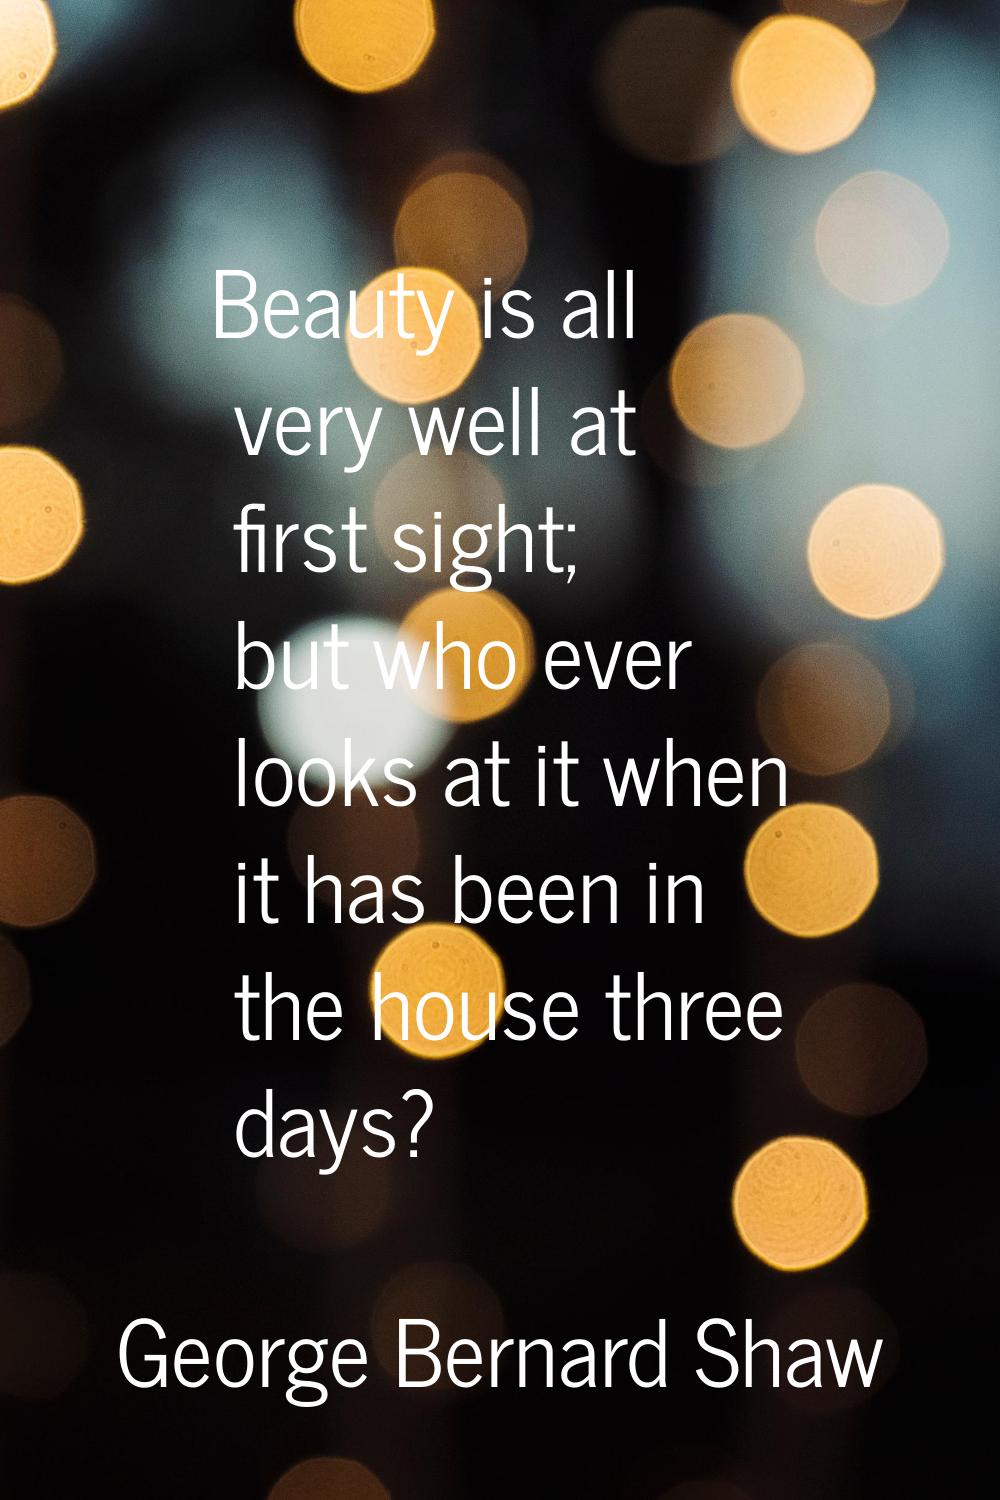 Beauty is all very well at first sight; but who ever looks at it when it has been in the house thre